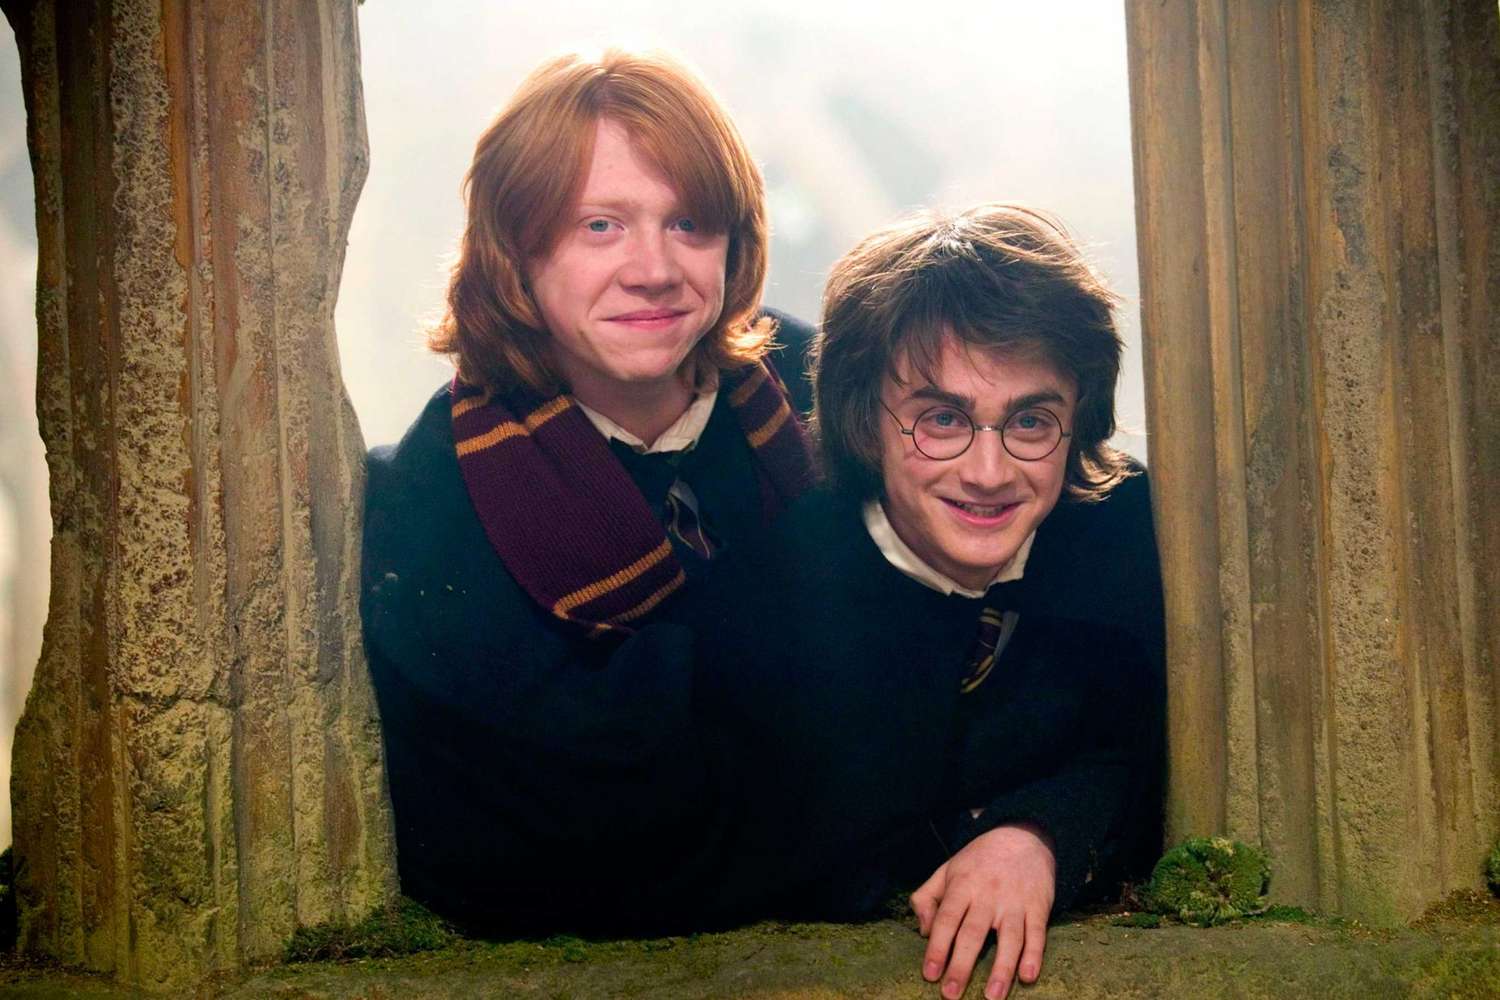 HARRY POTTER AND THE GOBLET OF FIRE, Rupert Grint, Daniel Radcliffe, 2005, (c) Warner Brothers/court